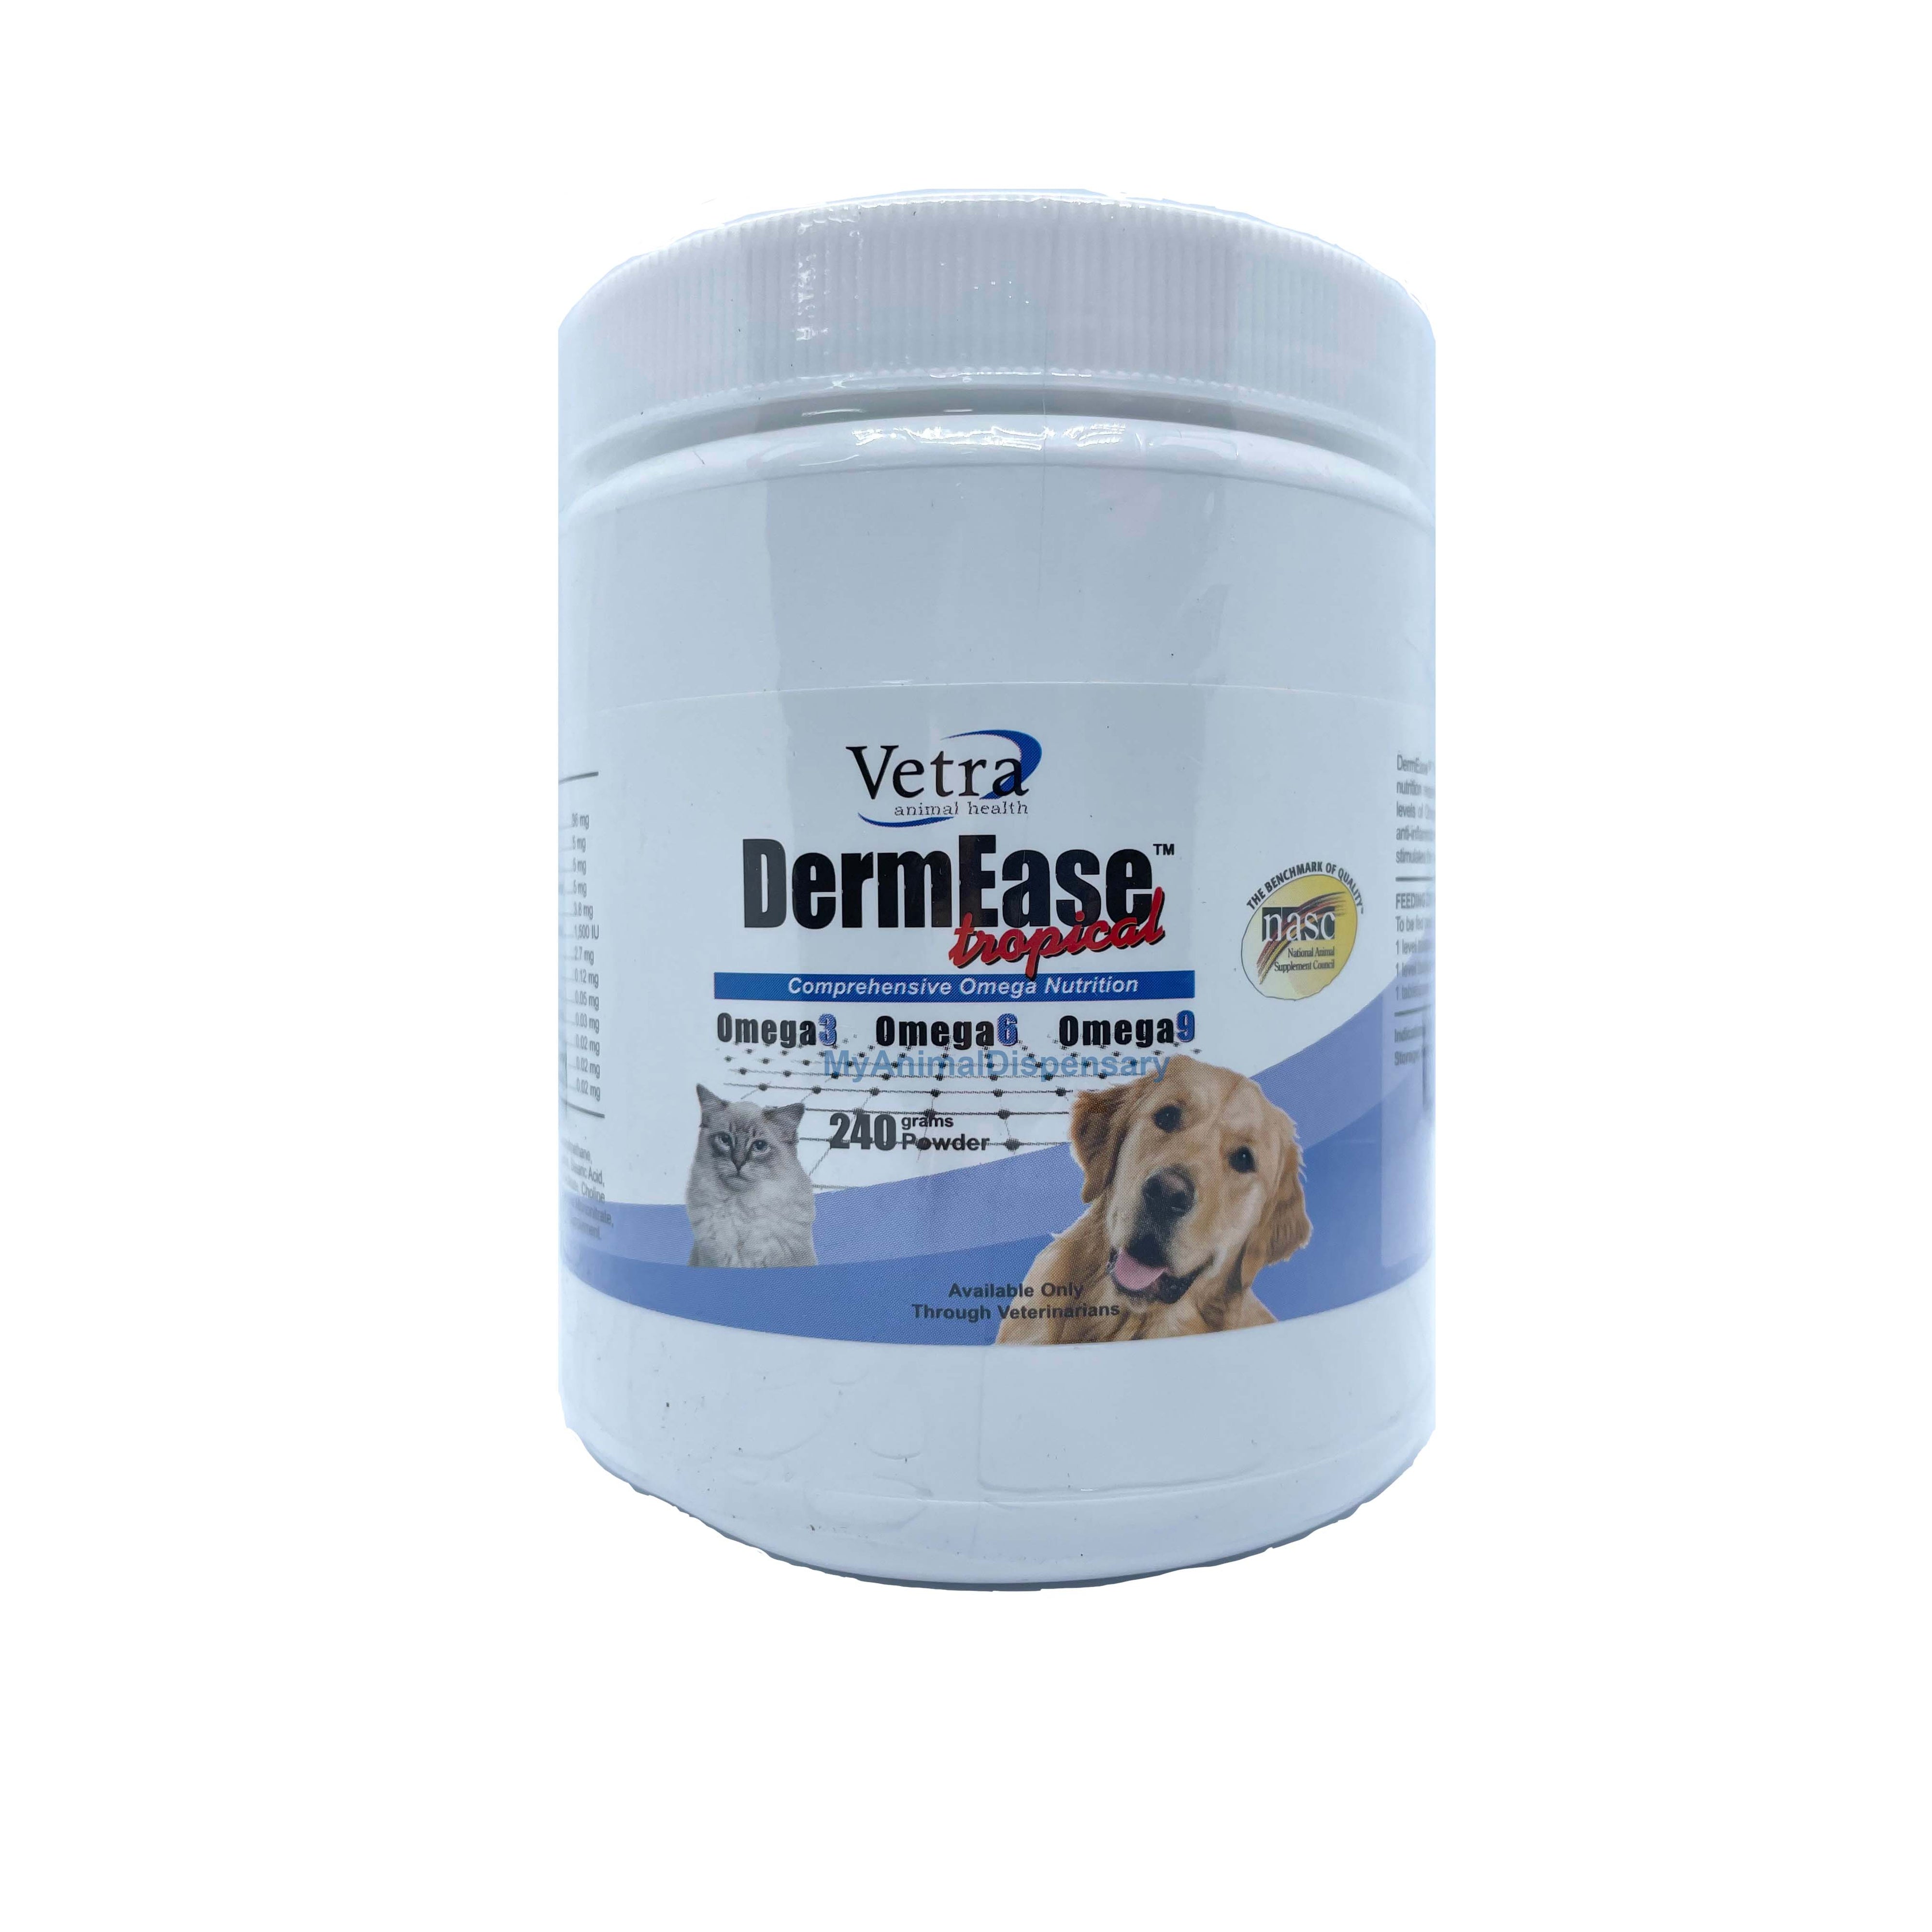 Vetra DermEase Tropical 240g - Complete Omega Nutrition for Dogs & Cats